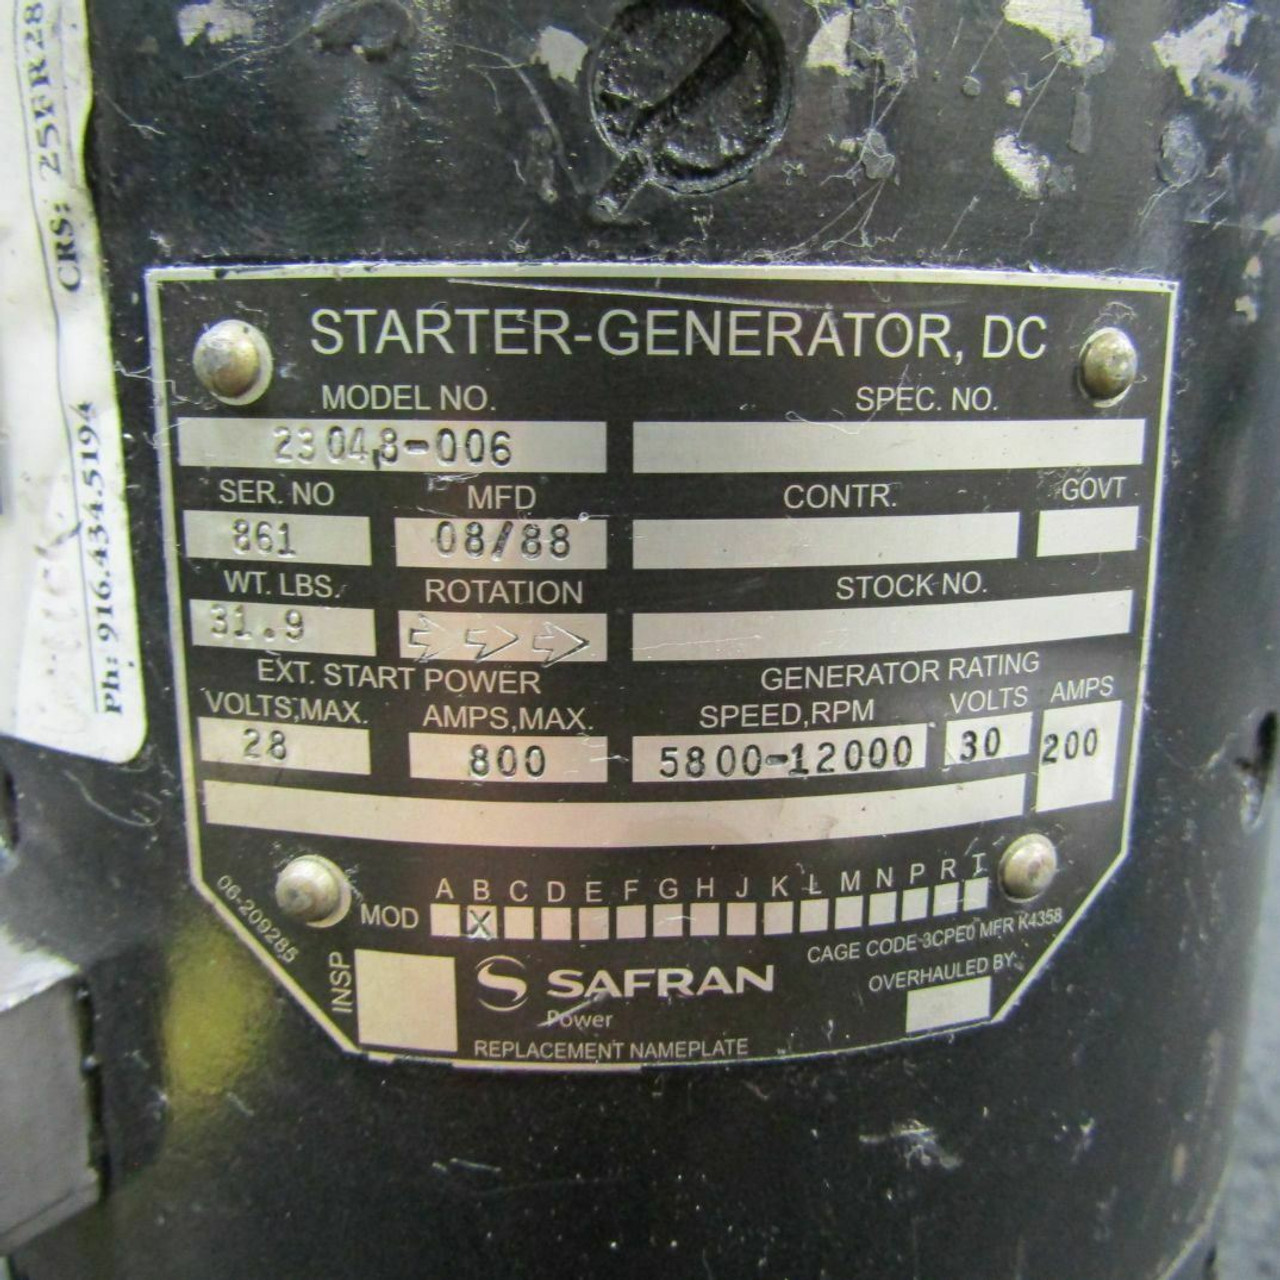 23048-006 Piper PA-31T Safran Starter Generator (W/ YELLOW SERVICEABLE  TAG)(C20)